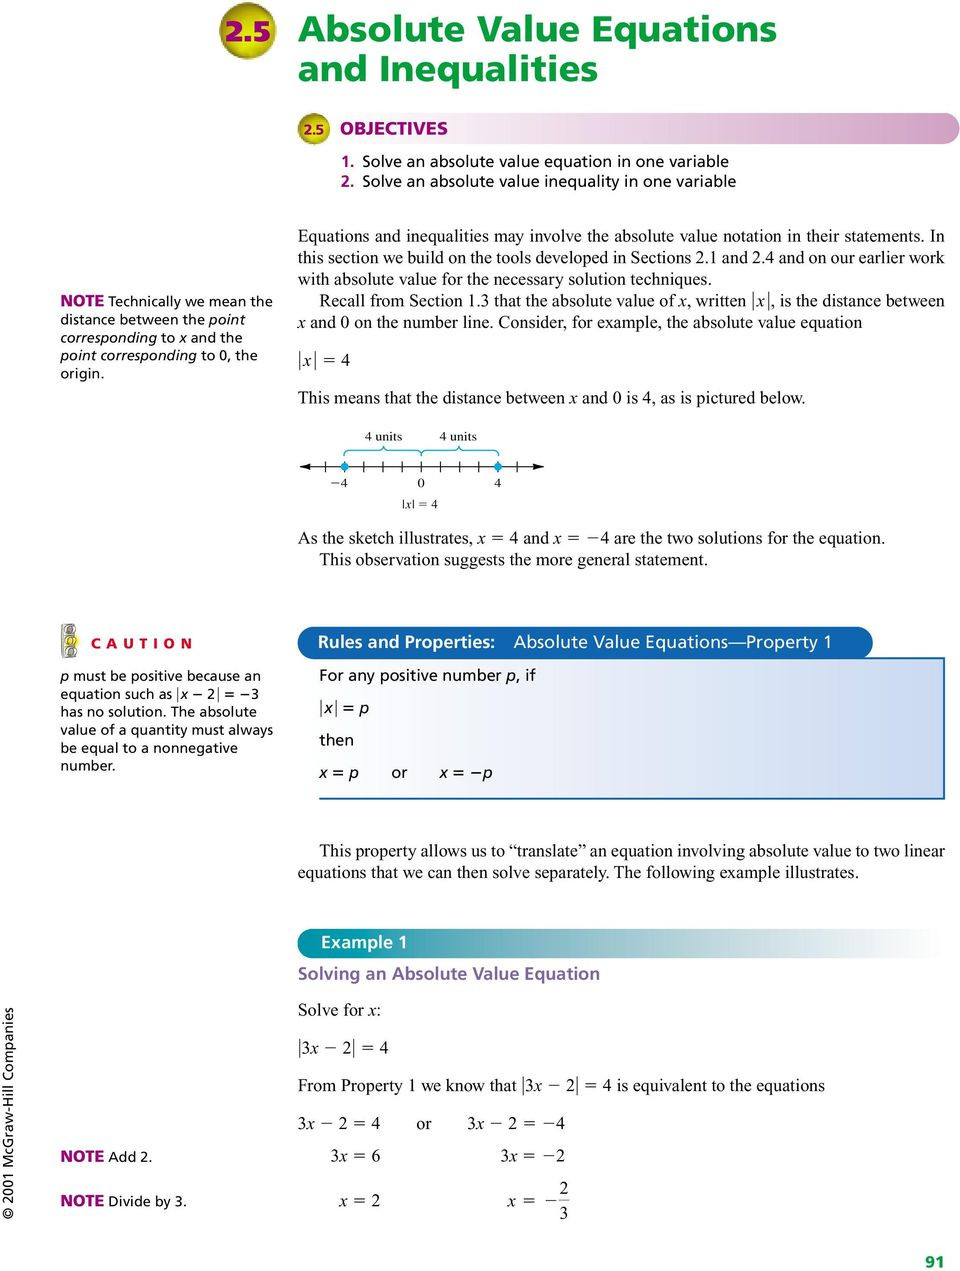 Absolute Value Equations Worksheet Absolute Value Equations and Inequalities Pdf Free Download